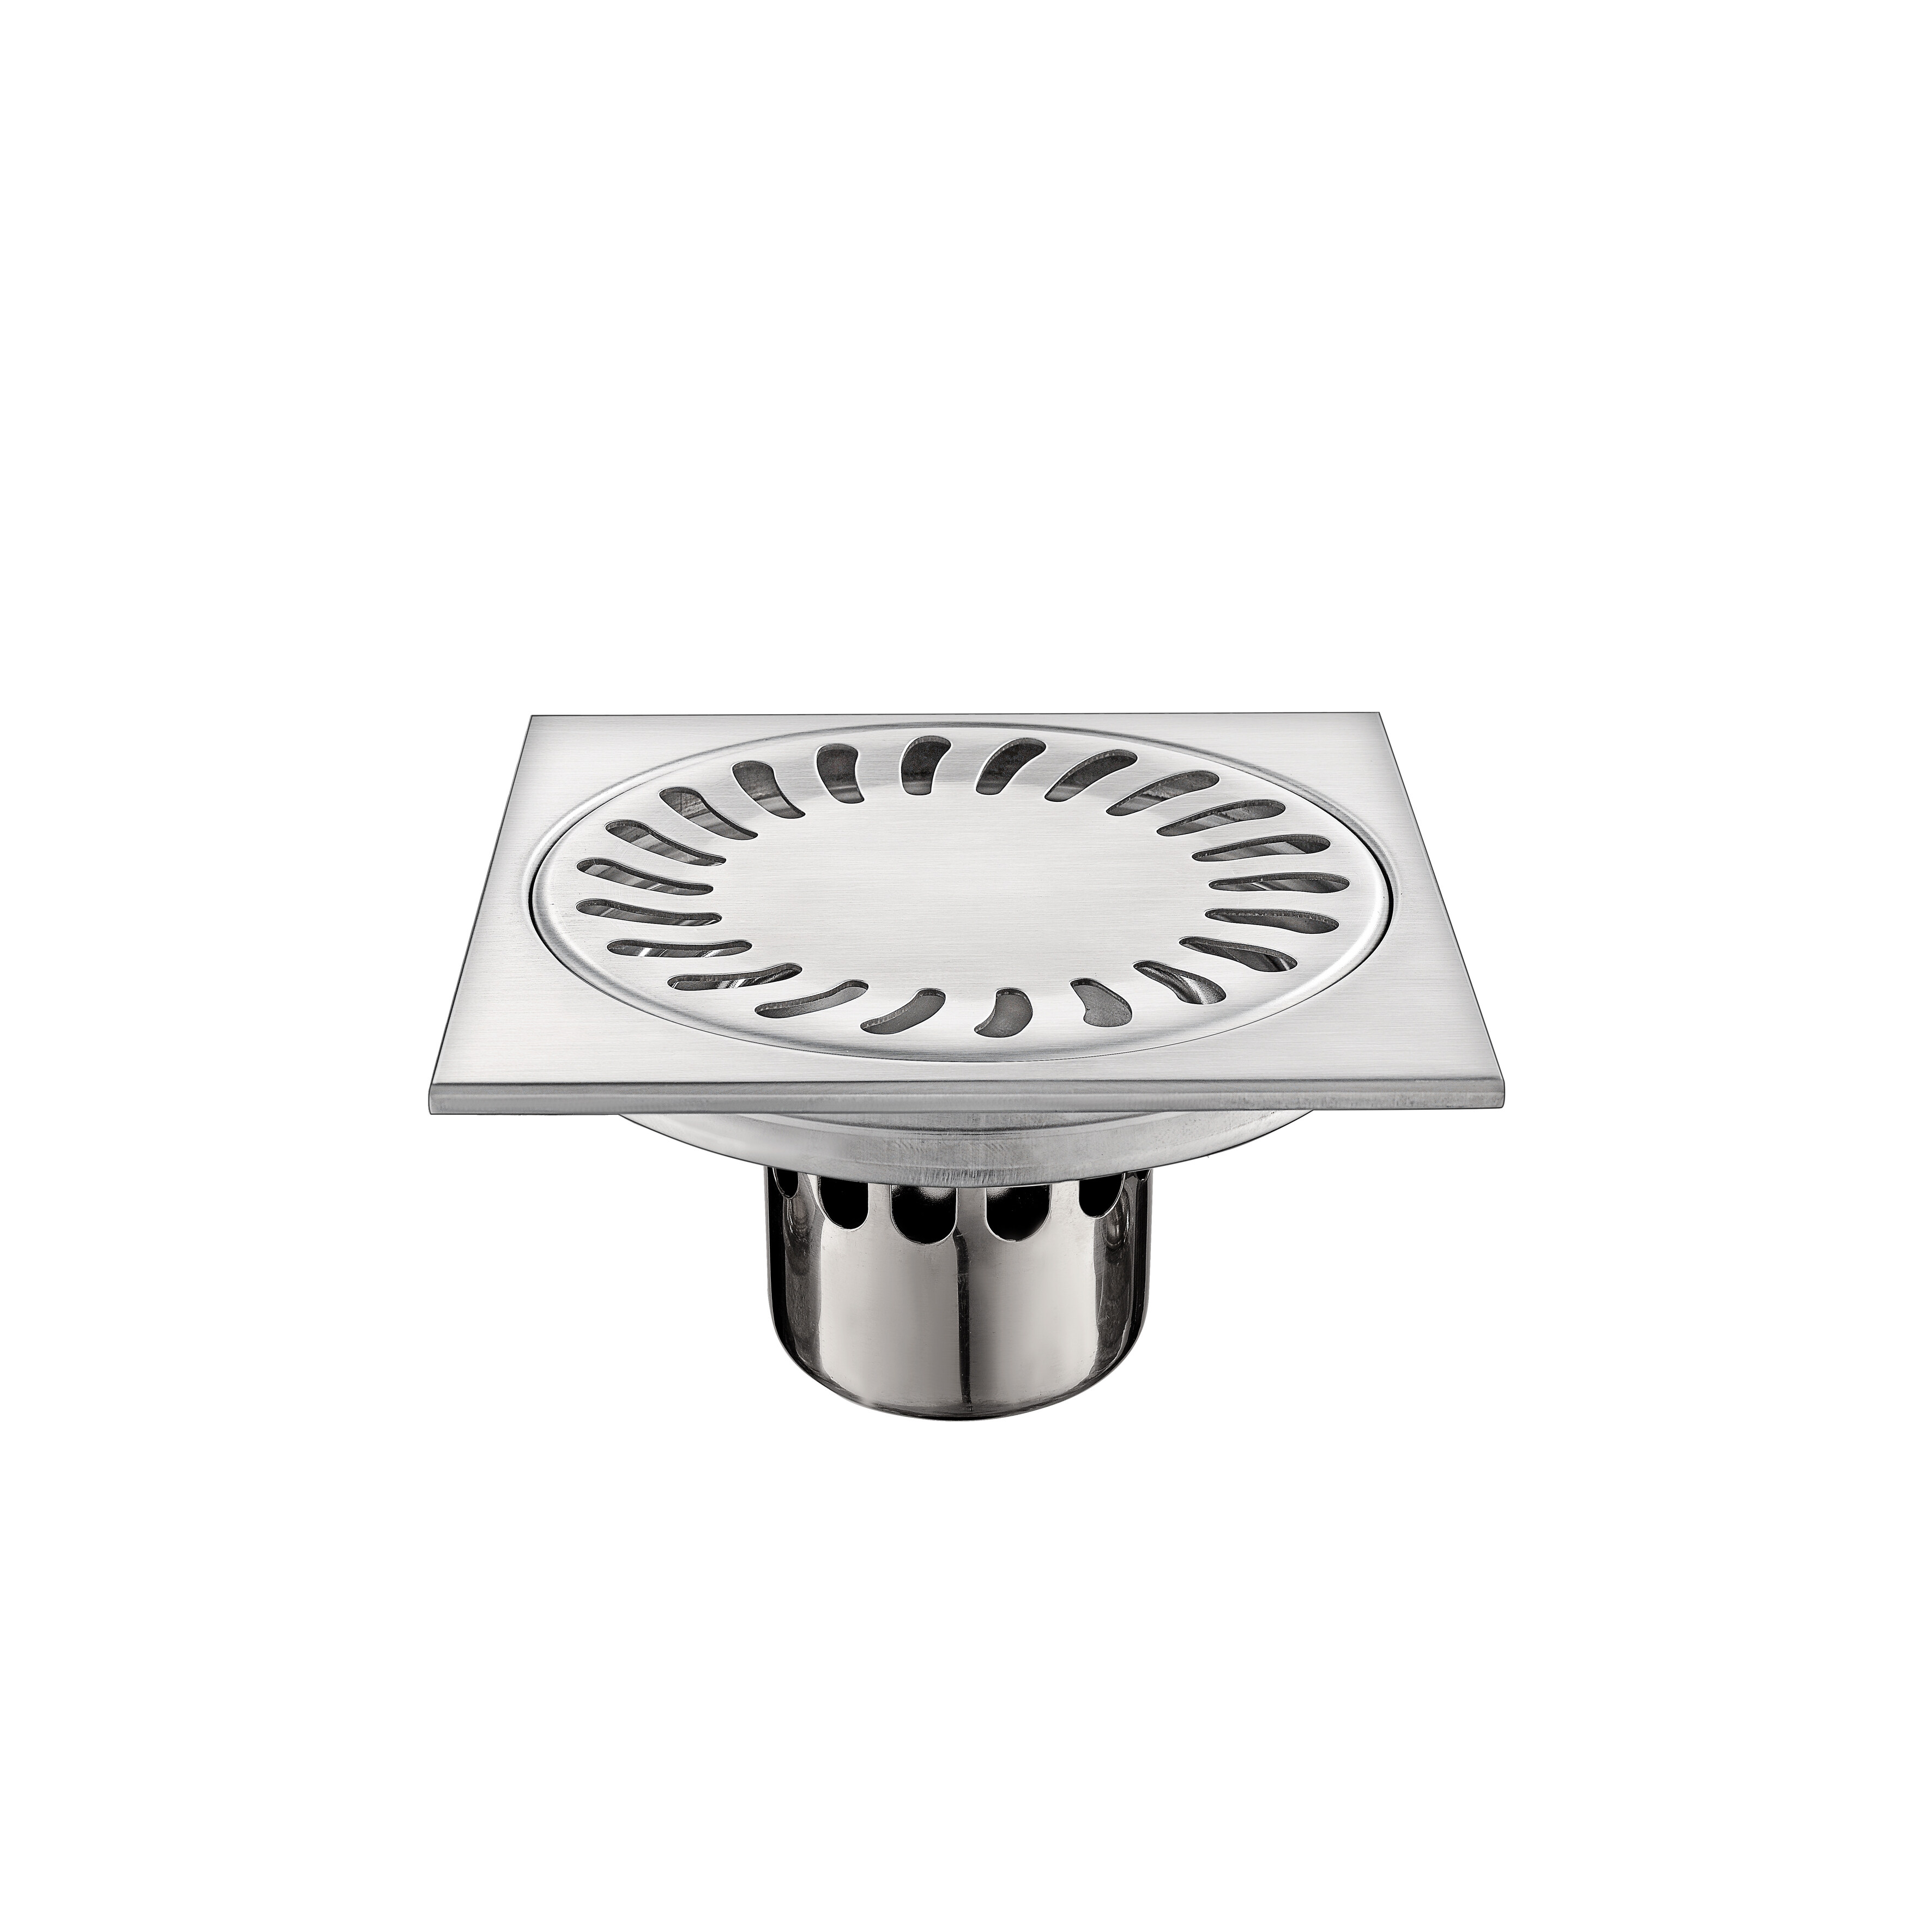 Anti Cockroach Trap Drain Bathroom Stainless Steel Floor Drain Square Covers Shower Drain